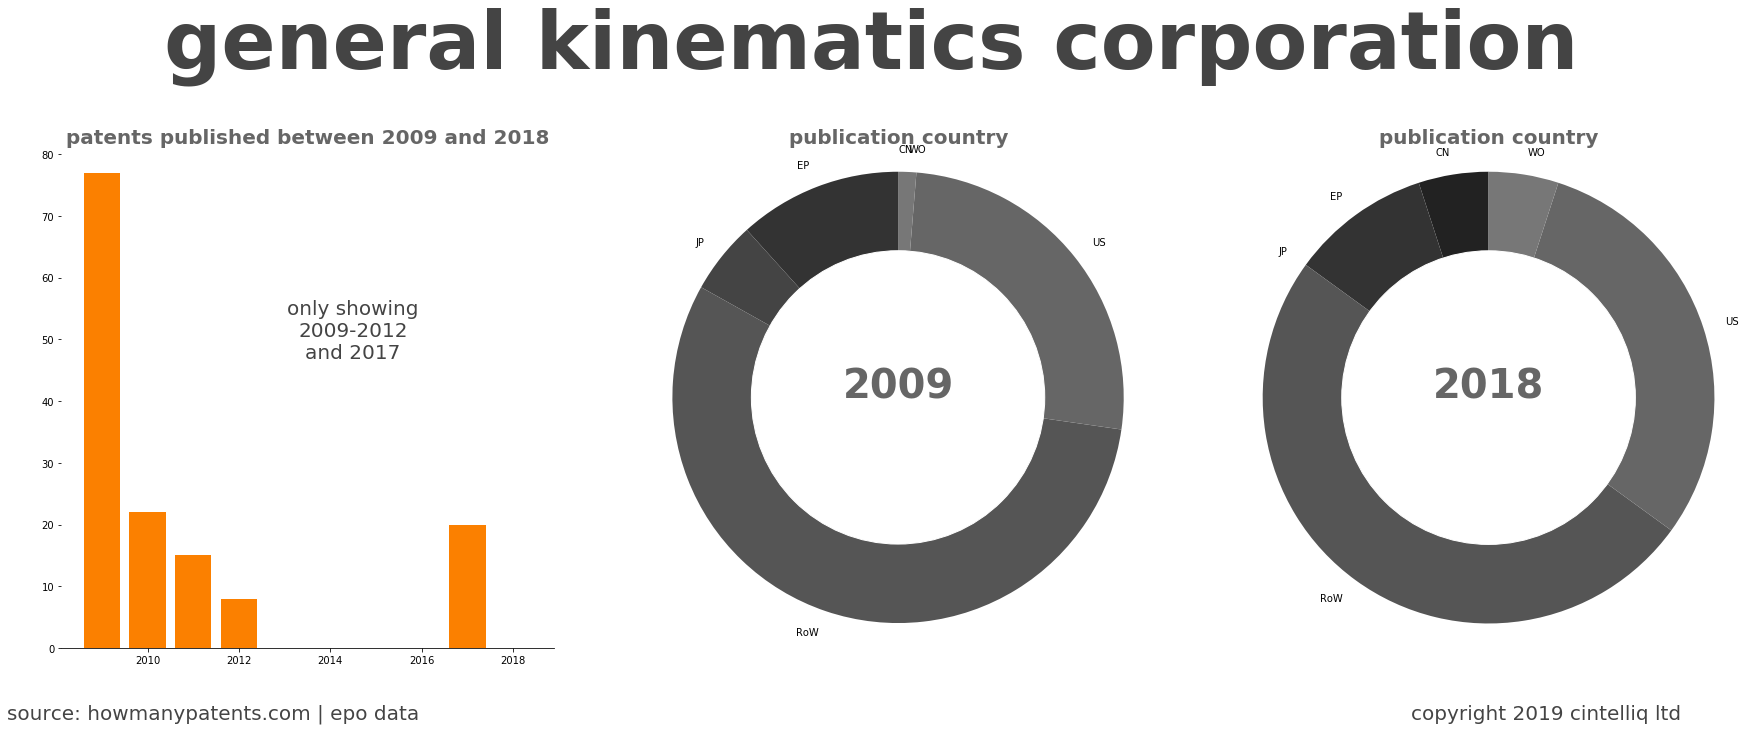 summary of patents for General Kinematics Corporation